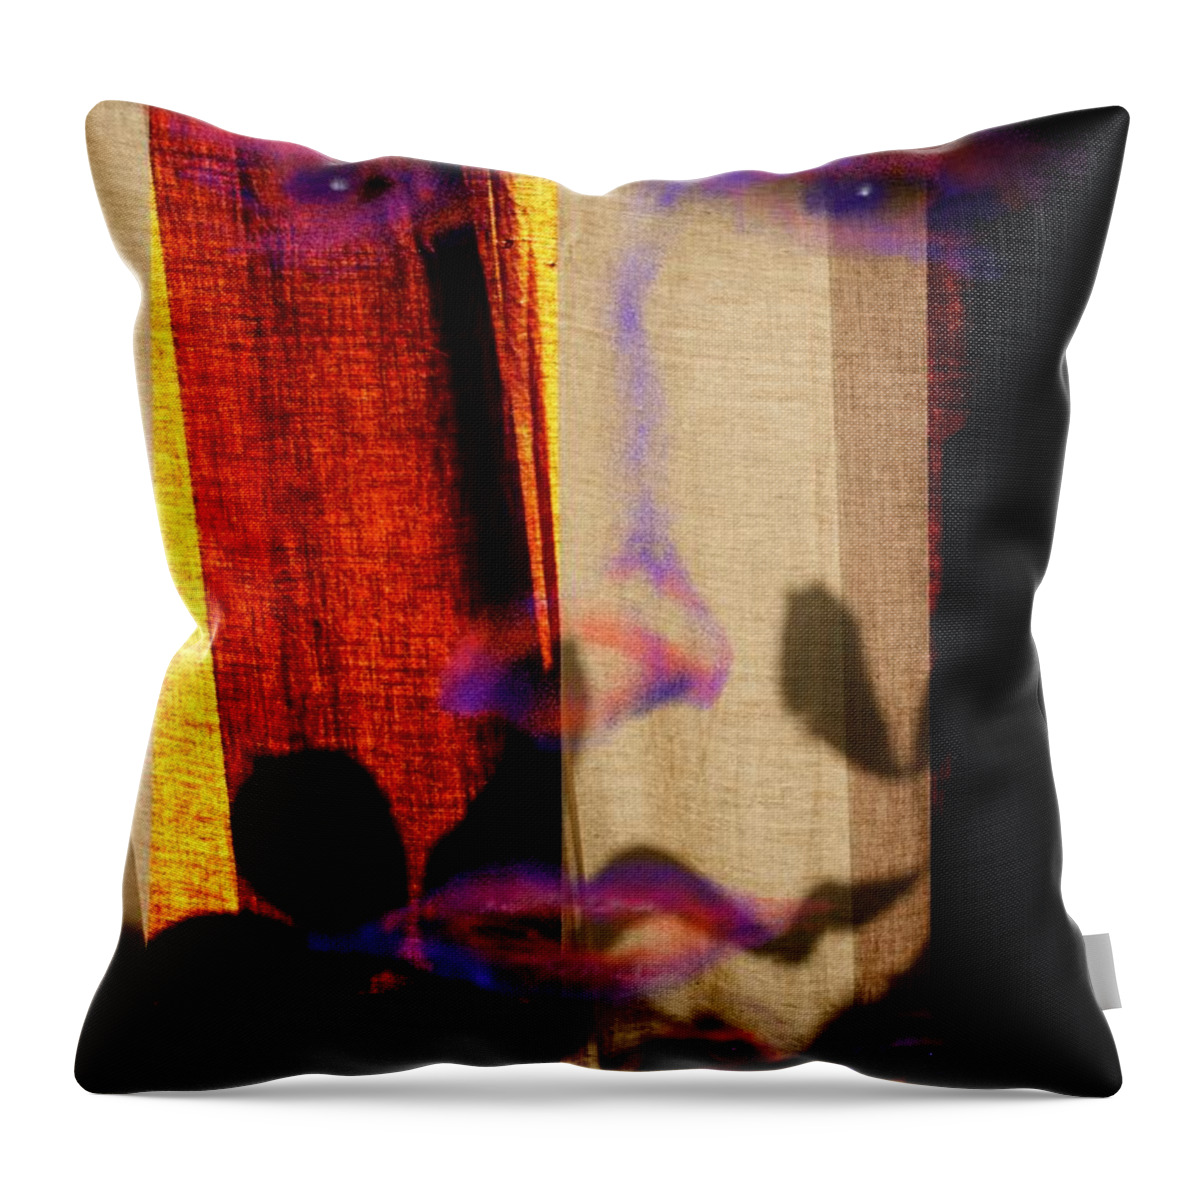 Victor Shelley Throw Pillow featuring the digital art At the Window by Victor Shelley